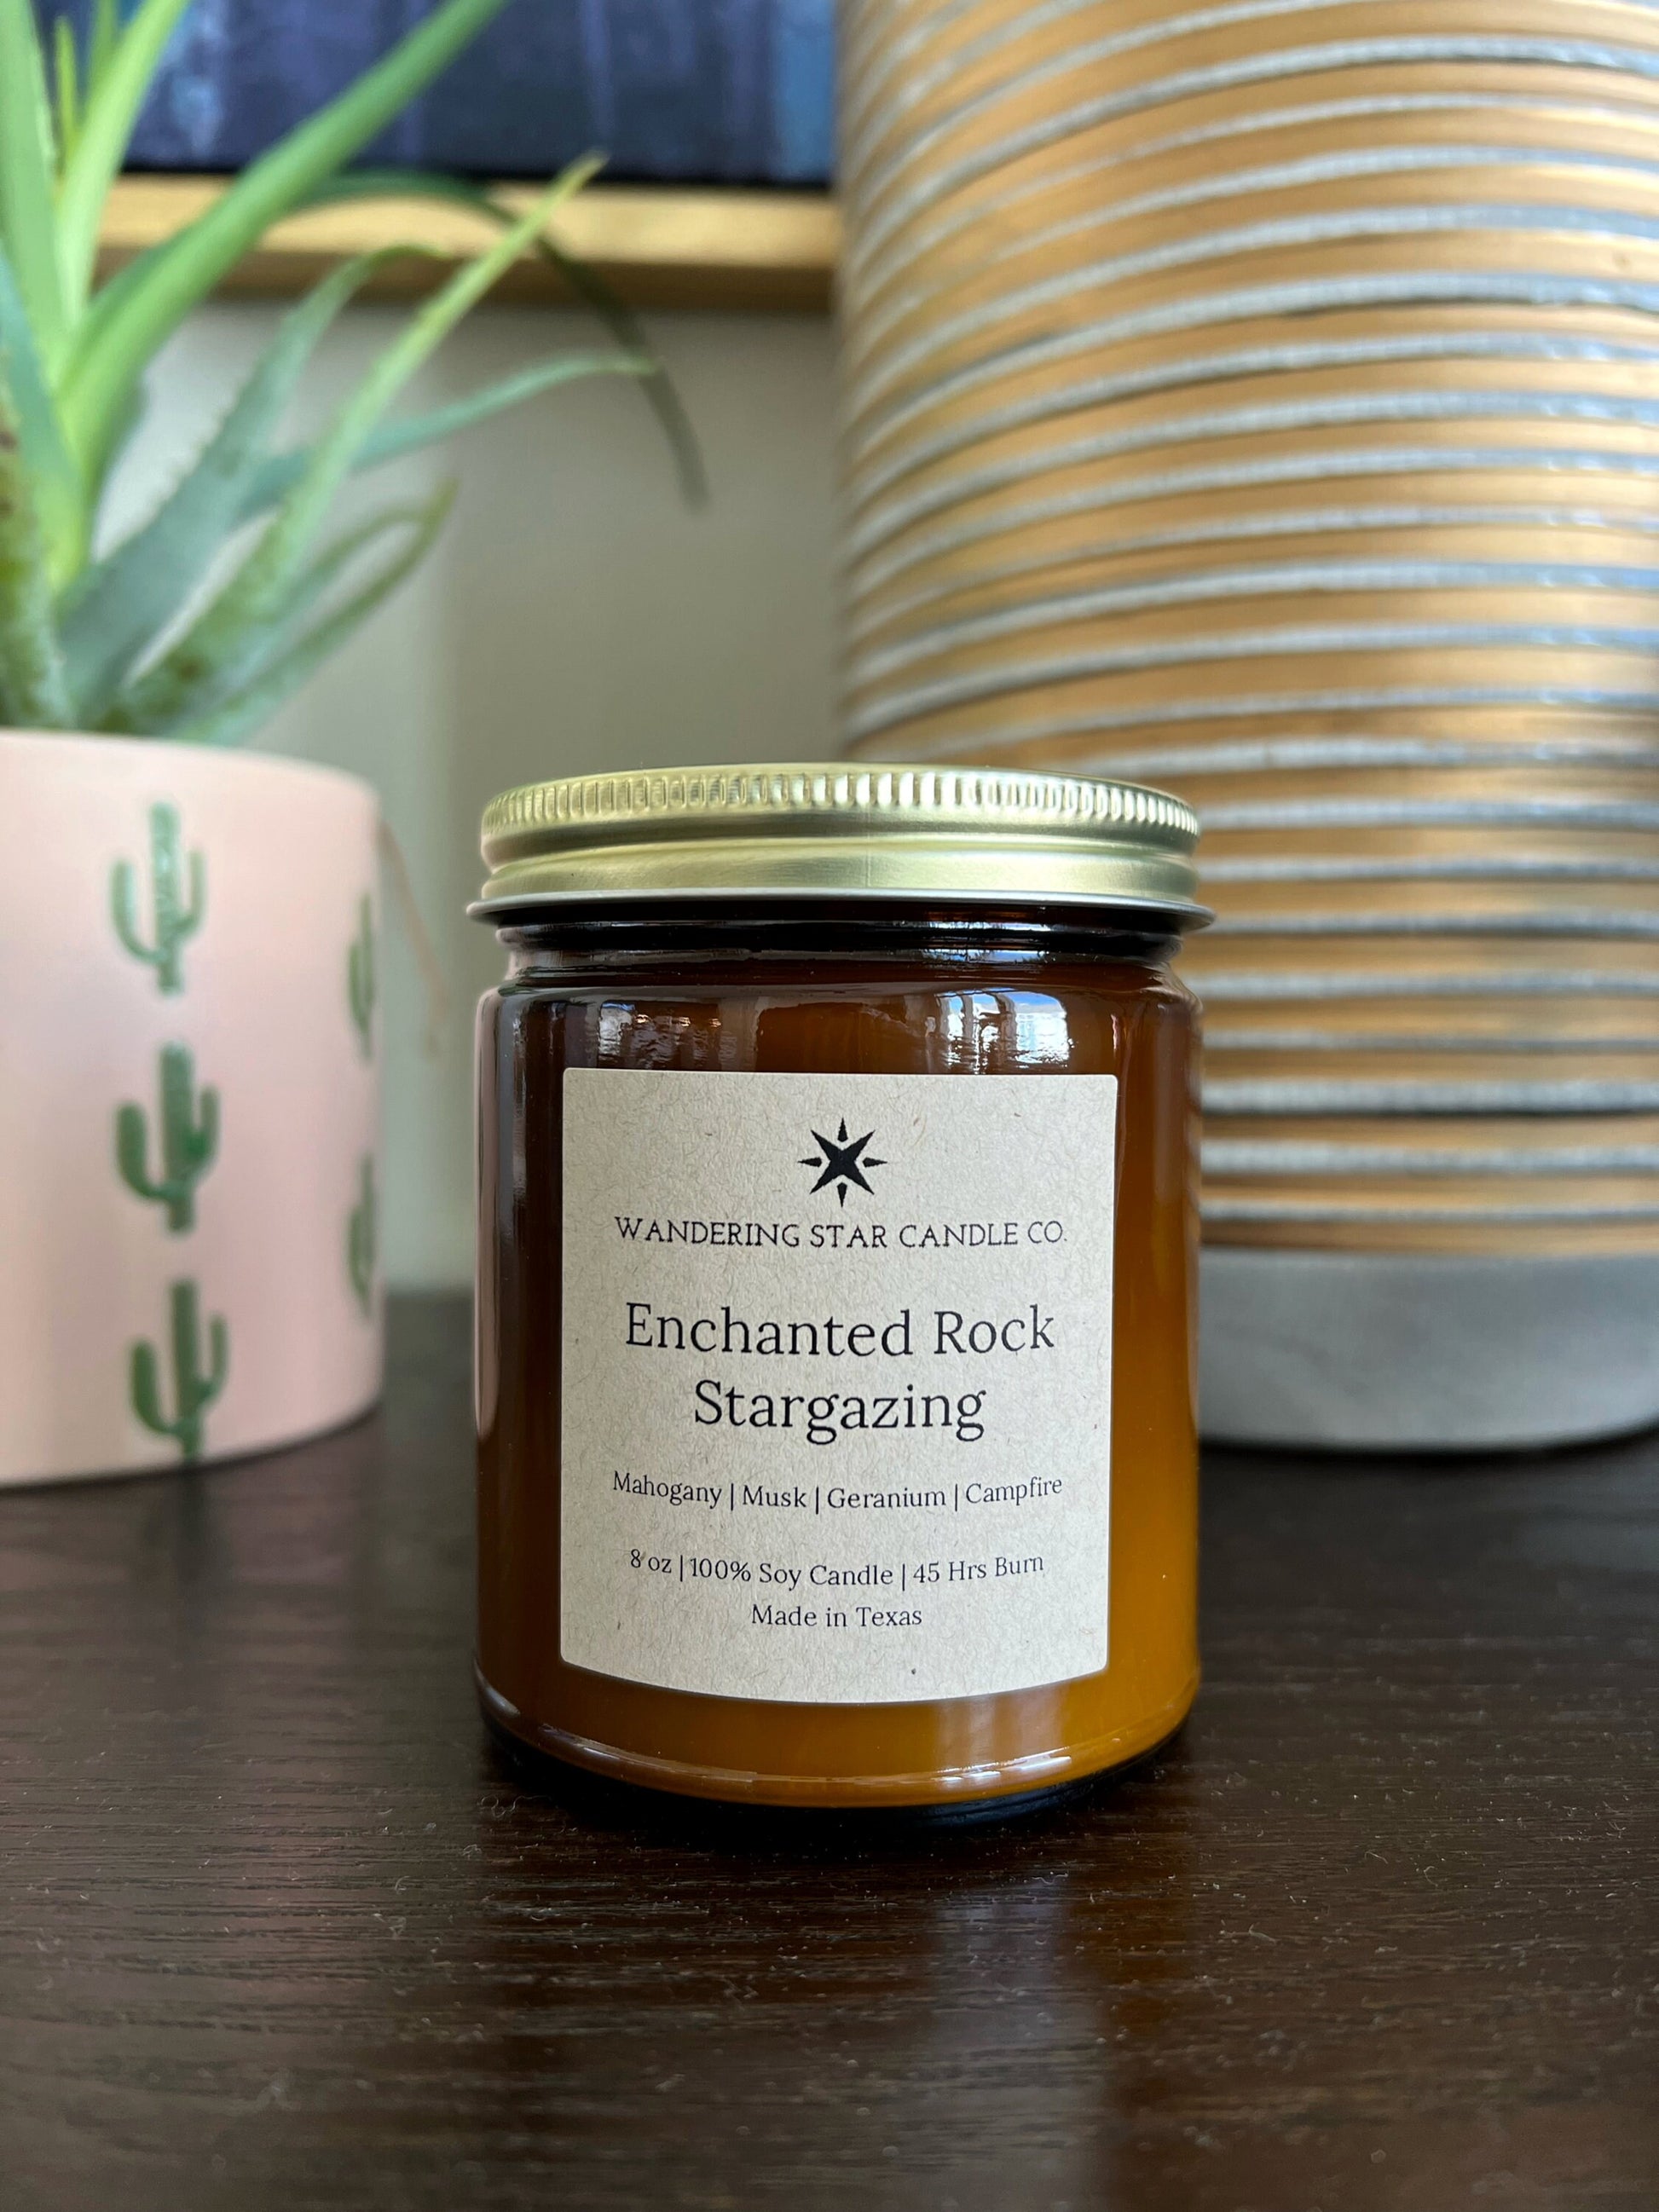 Enchanted Rock Stargazing | Mahogany Teakwood Campfire Musk Candle | Amber Jar Candle | Texas Gifts | Camping Hiking Gifts | Made in Texas